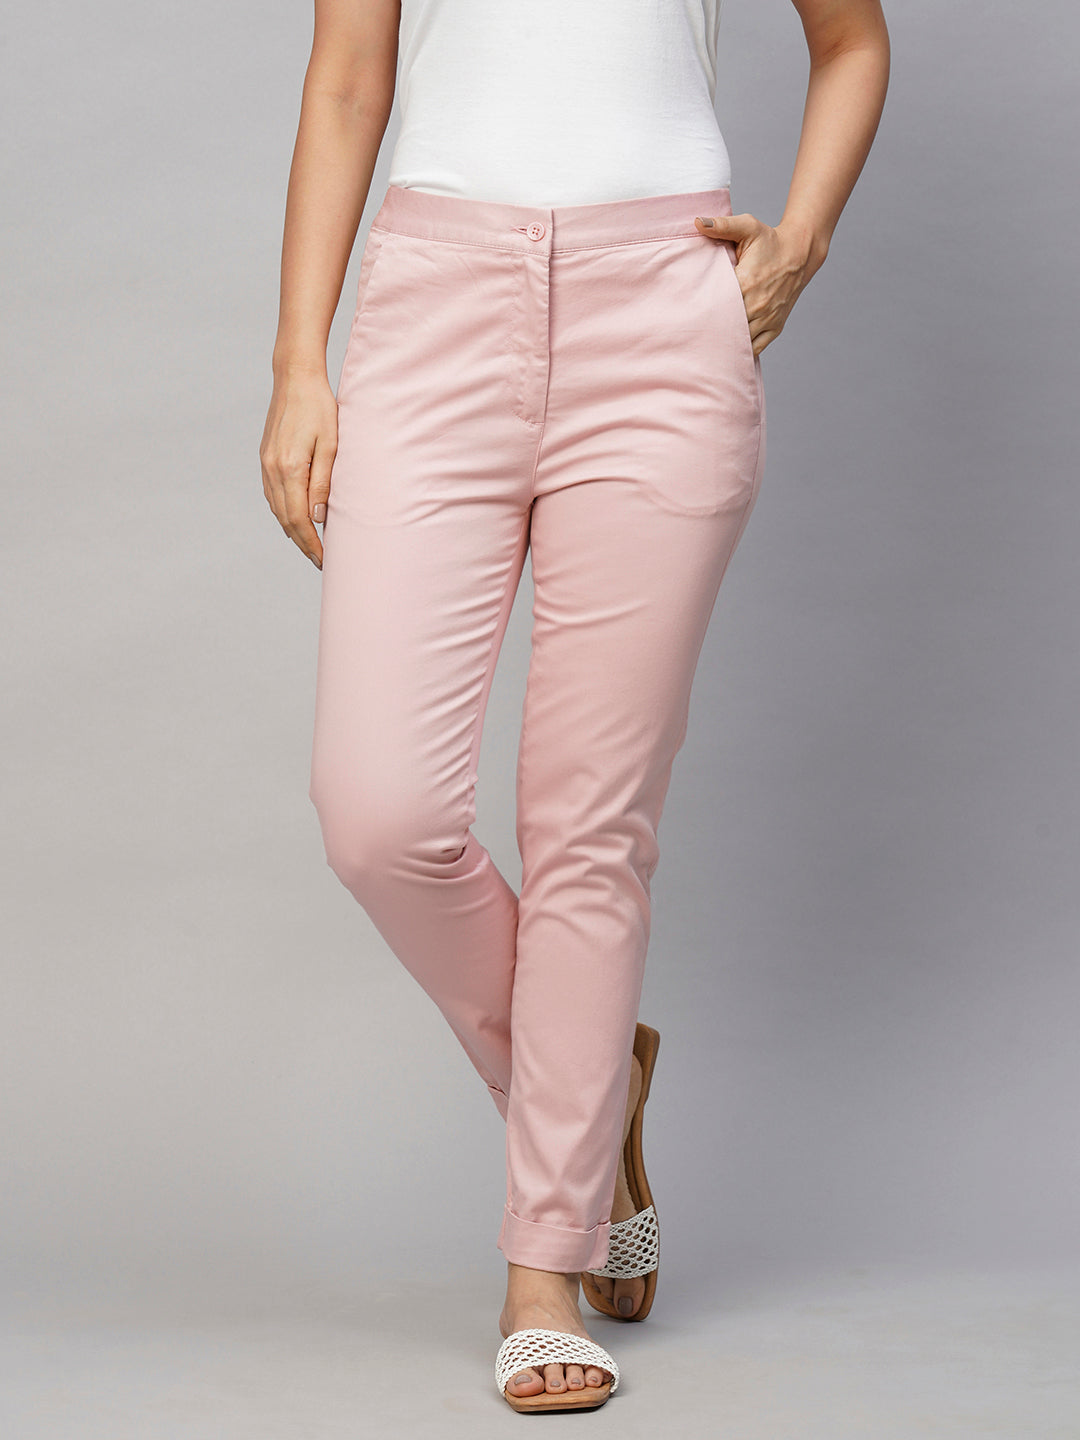 Vans Authentic chino pants in pink | ASOS